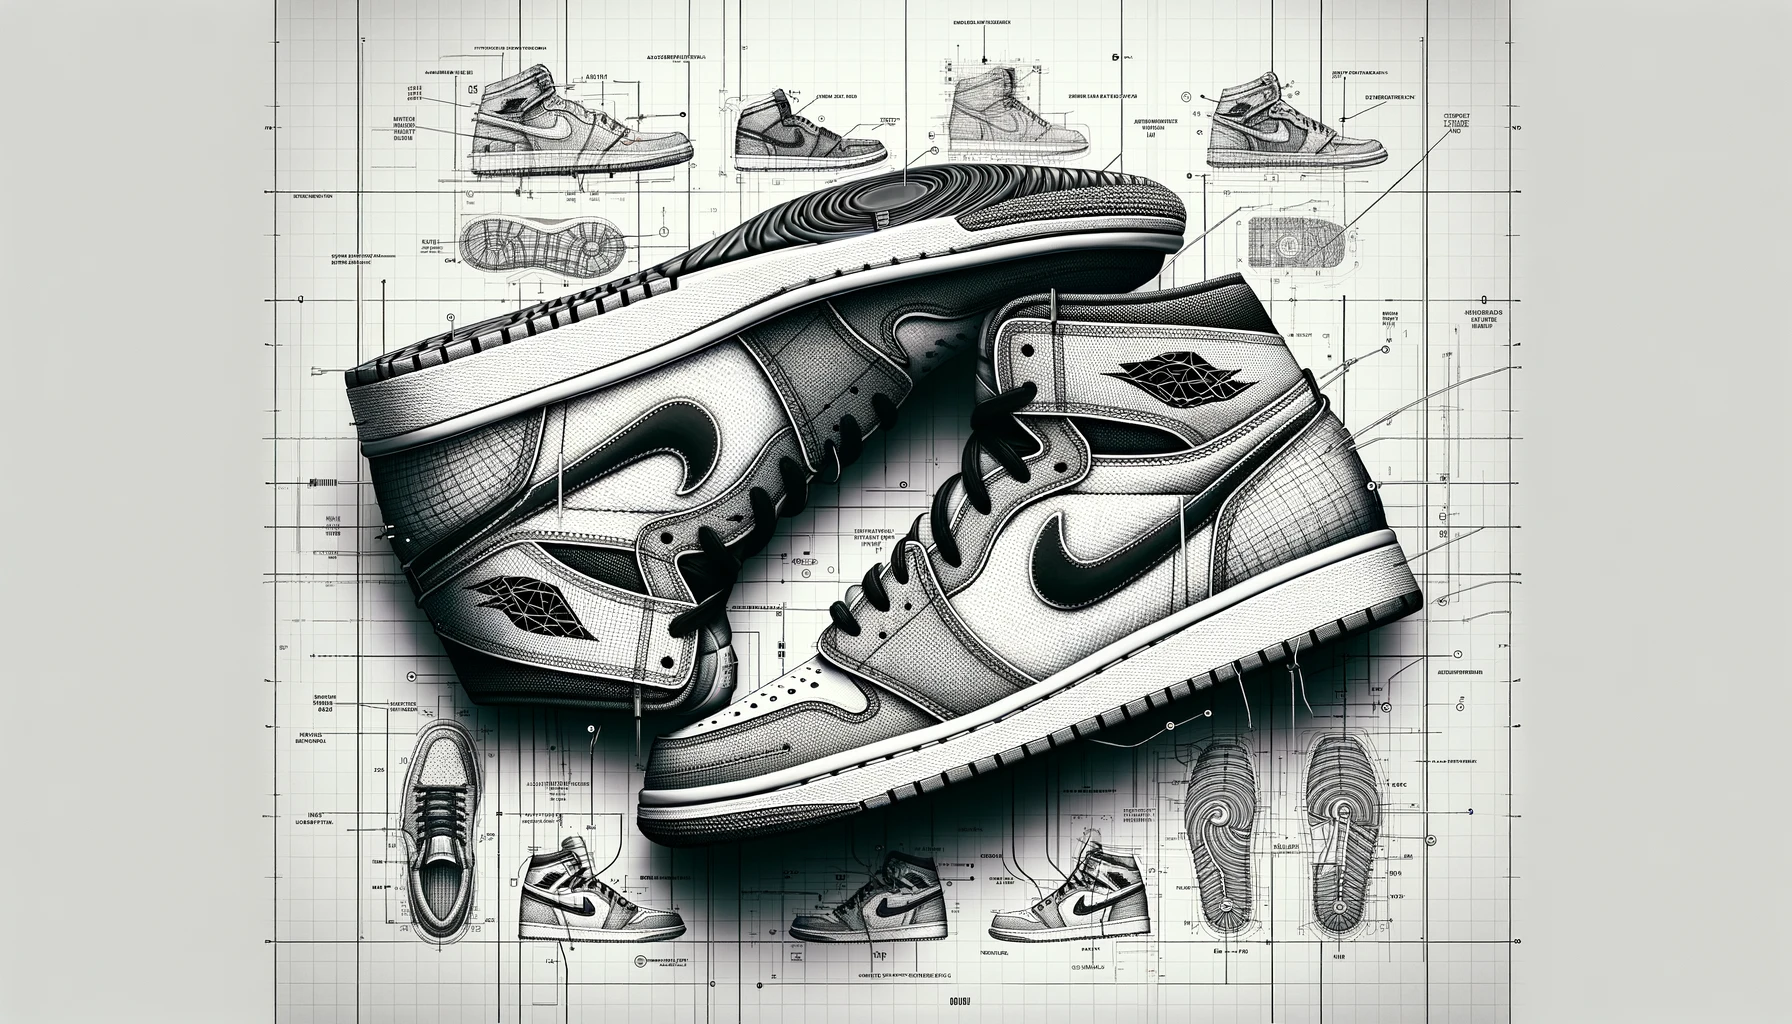 How Have Different Technologies Contributed to the Evolution of Air Jordan Sneakers?